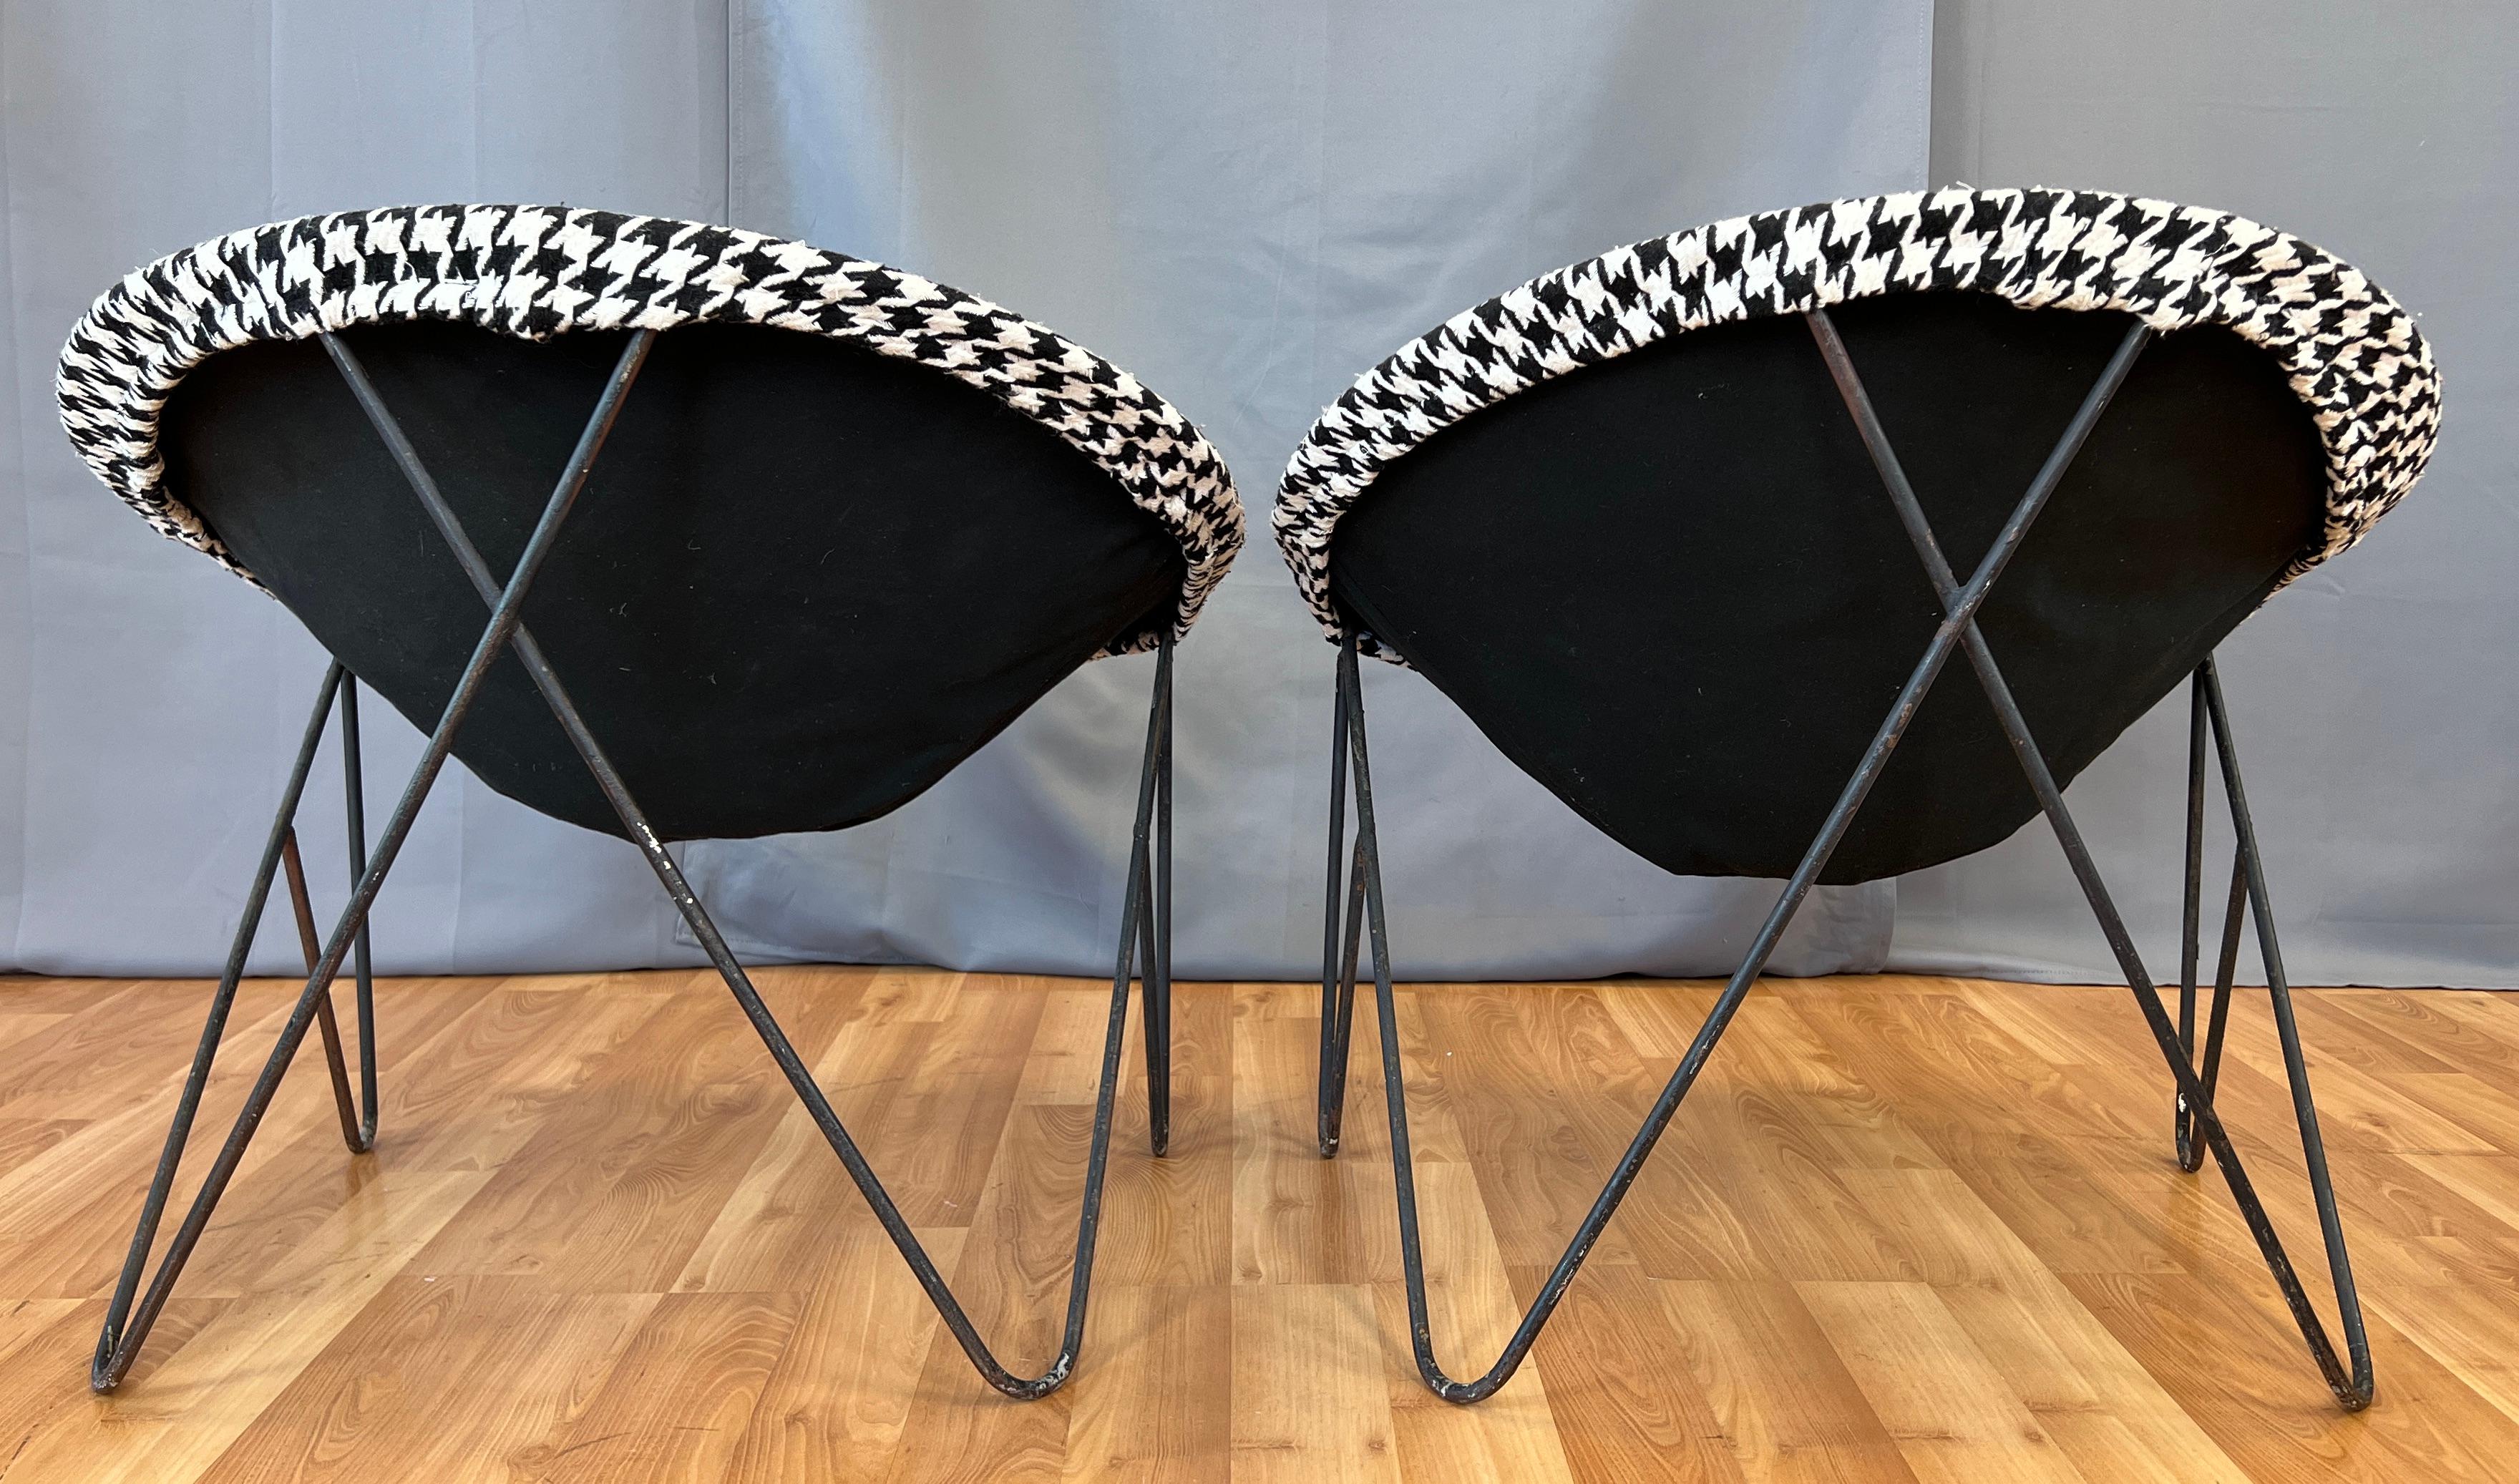 Mid-20th Century Pair of Mid-century 1950s Wrought Iron Hoop Chairs Black/White Upholstery  For Sale